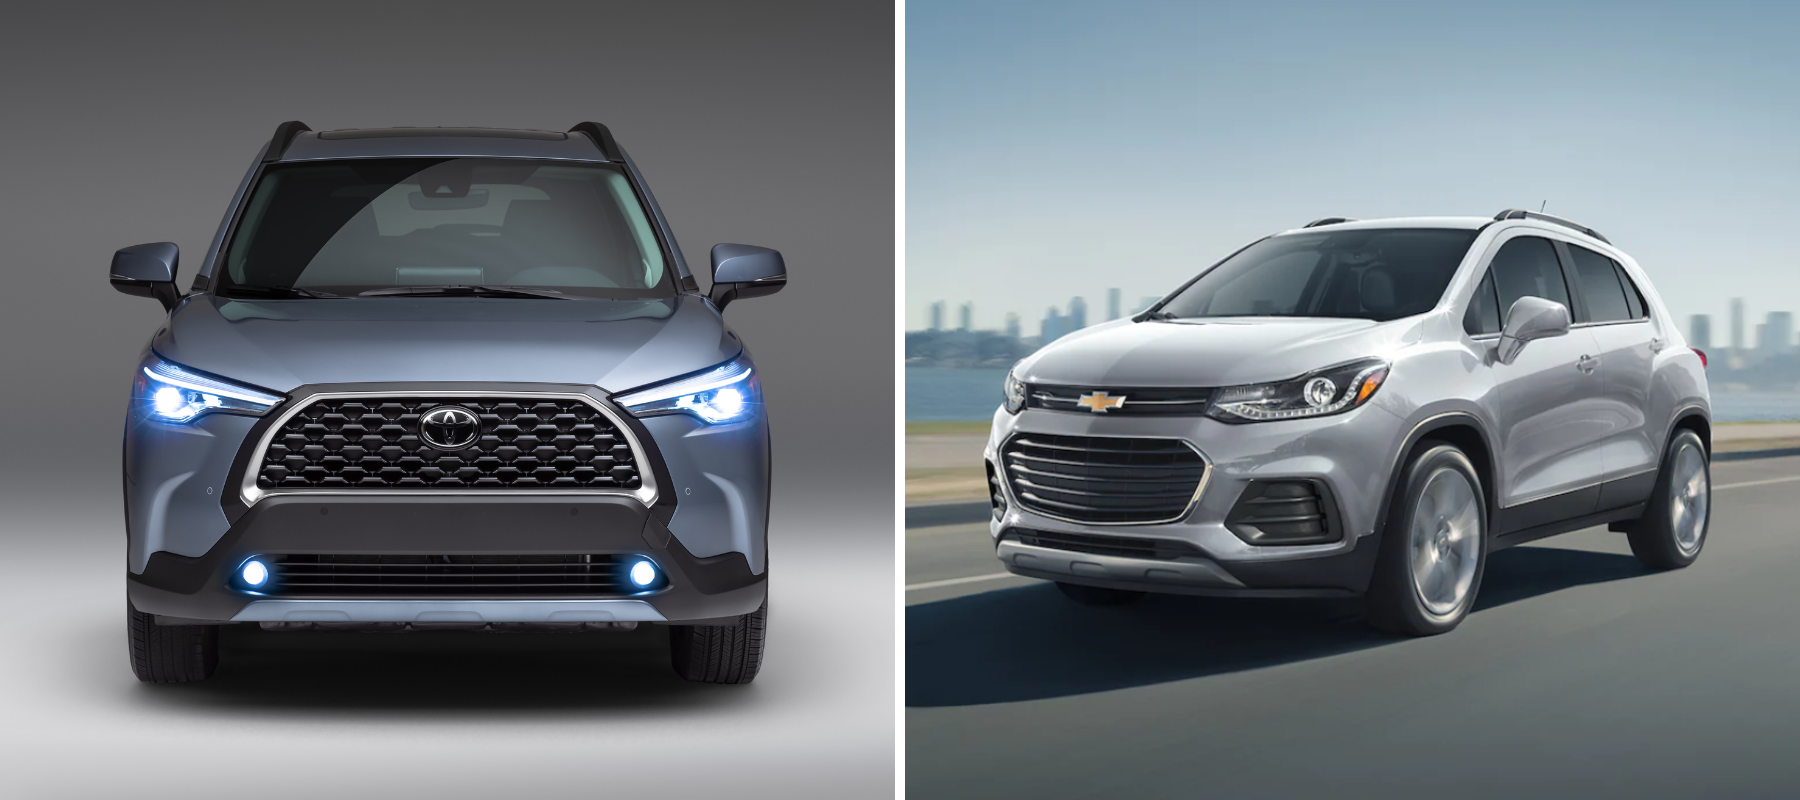 The 2022 Toyota Corolla Cross and 2022 Chevrolet Trax subcompact SUV models